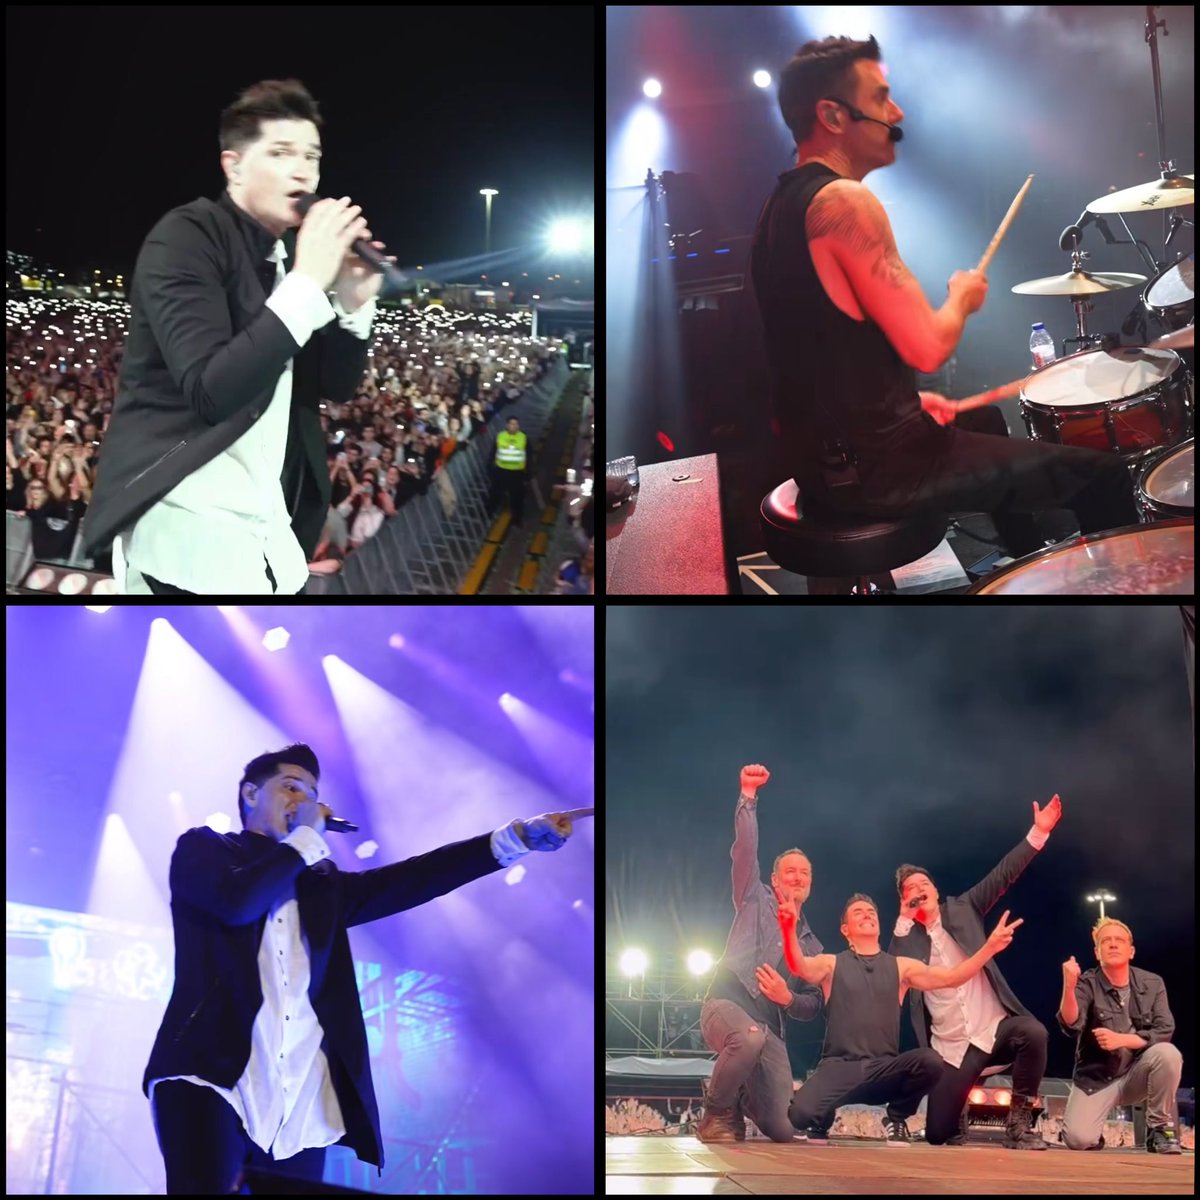 Wow Guys !! Looks like you had an amazing night in Porto 🇵🇹😍😍🔥🔥 Proud of you❤️Thanks for the pics and videos in your stories 🙏🏻🙏🏻❤️Have a great day today ❤️ have fun and stay safe 🙏🏻❤️😘@thescript @TheScript_Danny @glenofthepower @benjaminsarge and Ben W #ArmOpen #Always